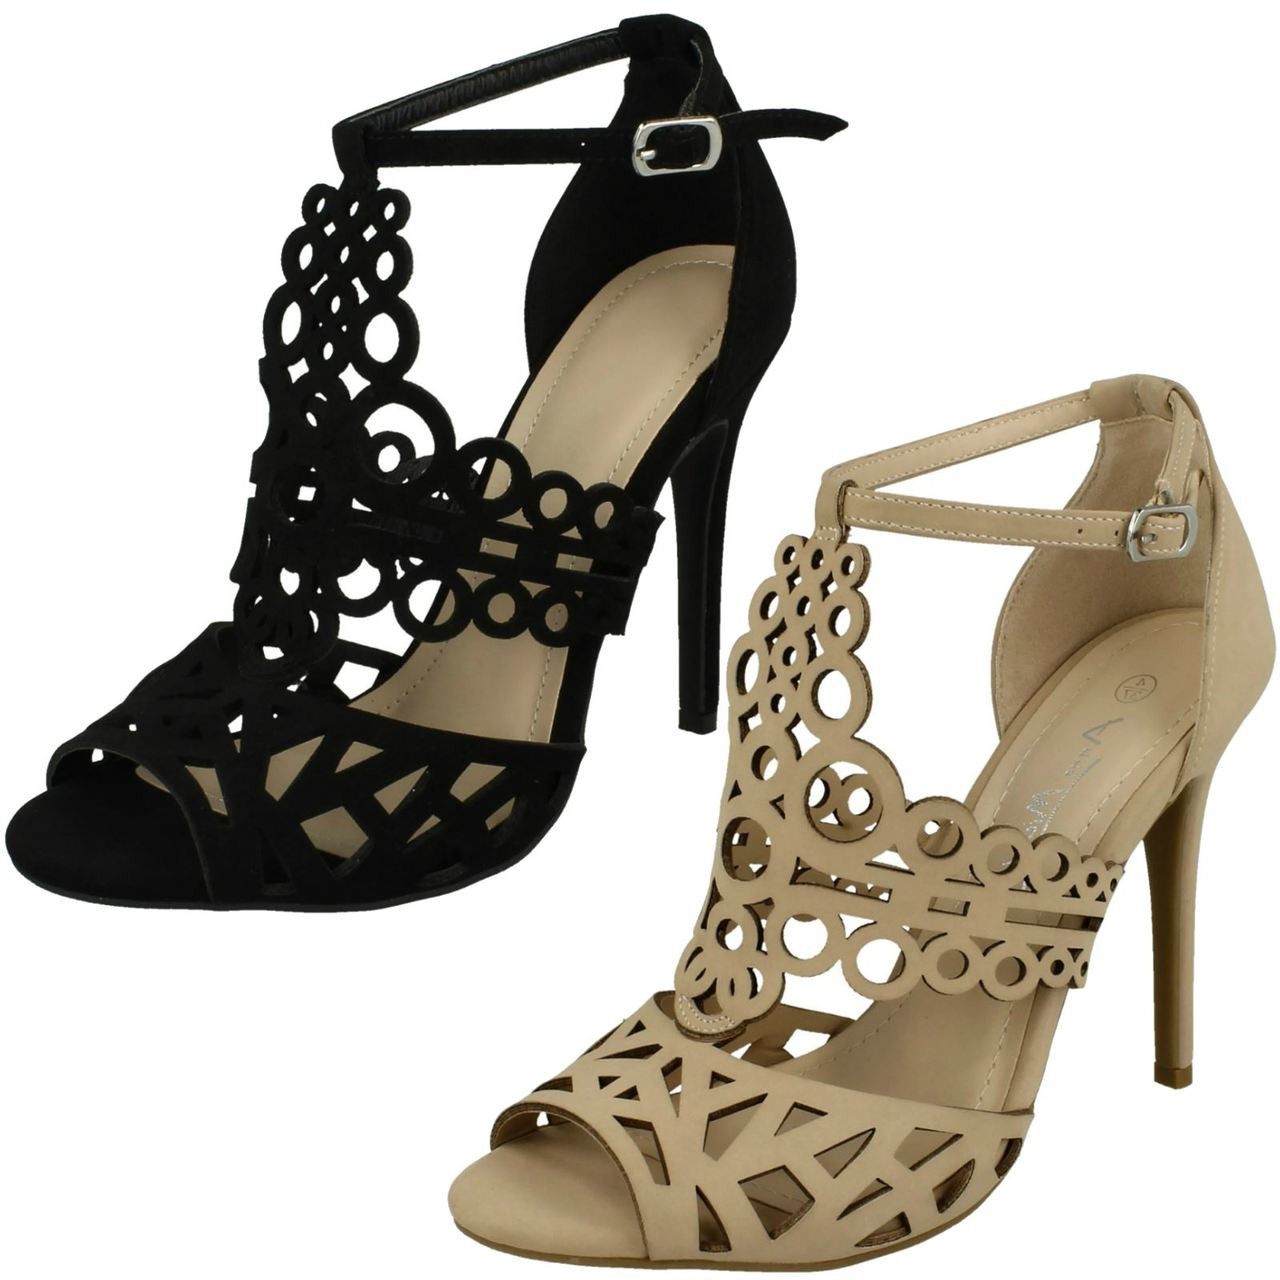 CUT OUT HEELS TO SPICE UP YOUR STYLE - FASHION